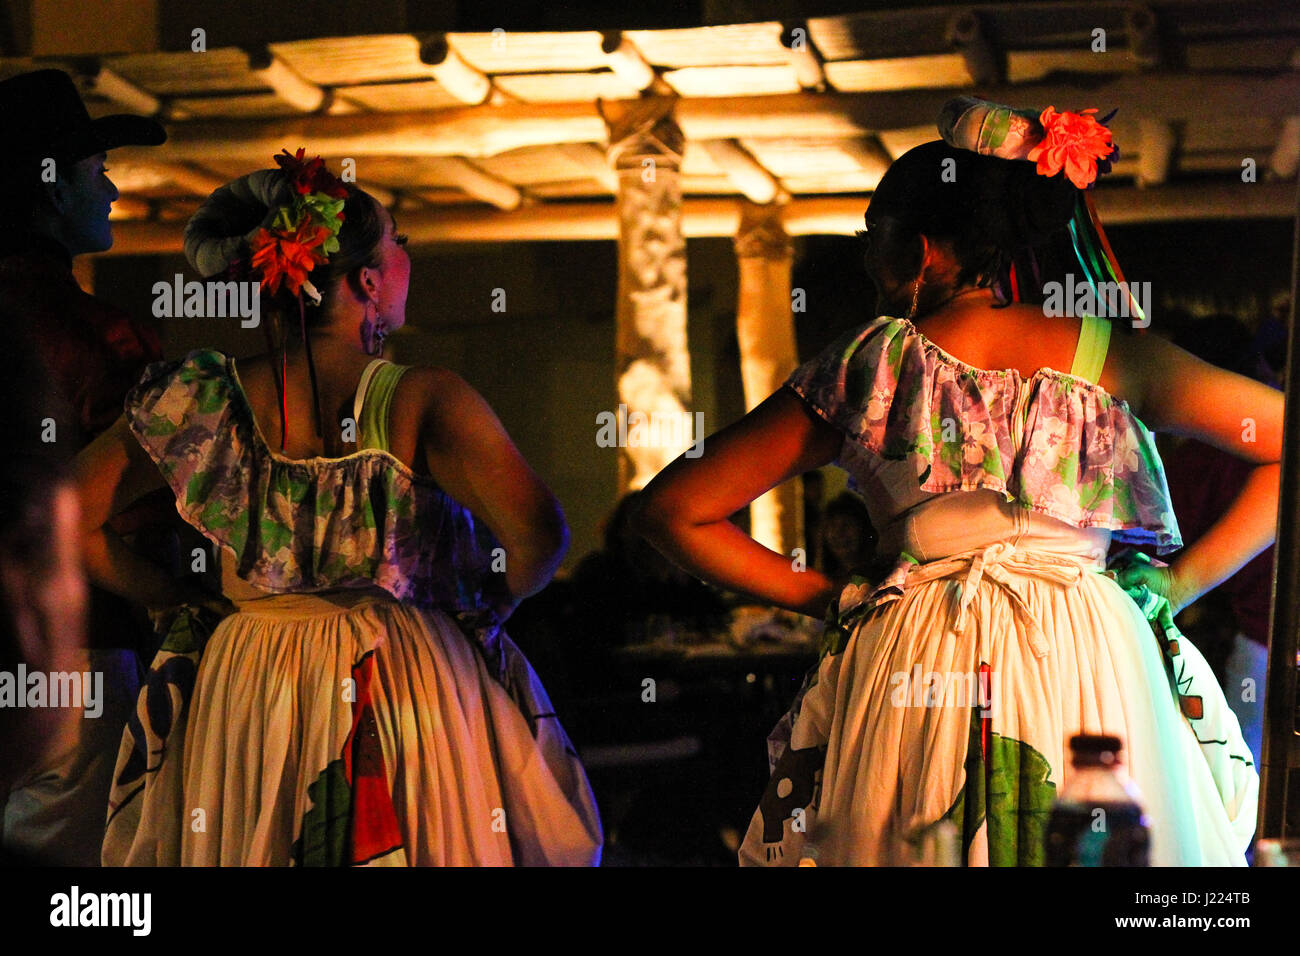 beautiful Mexican women in traditional dress, their hair up in buns and tied with ribbons, laughing together before an evening performance Stock Photo